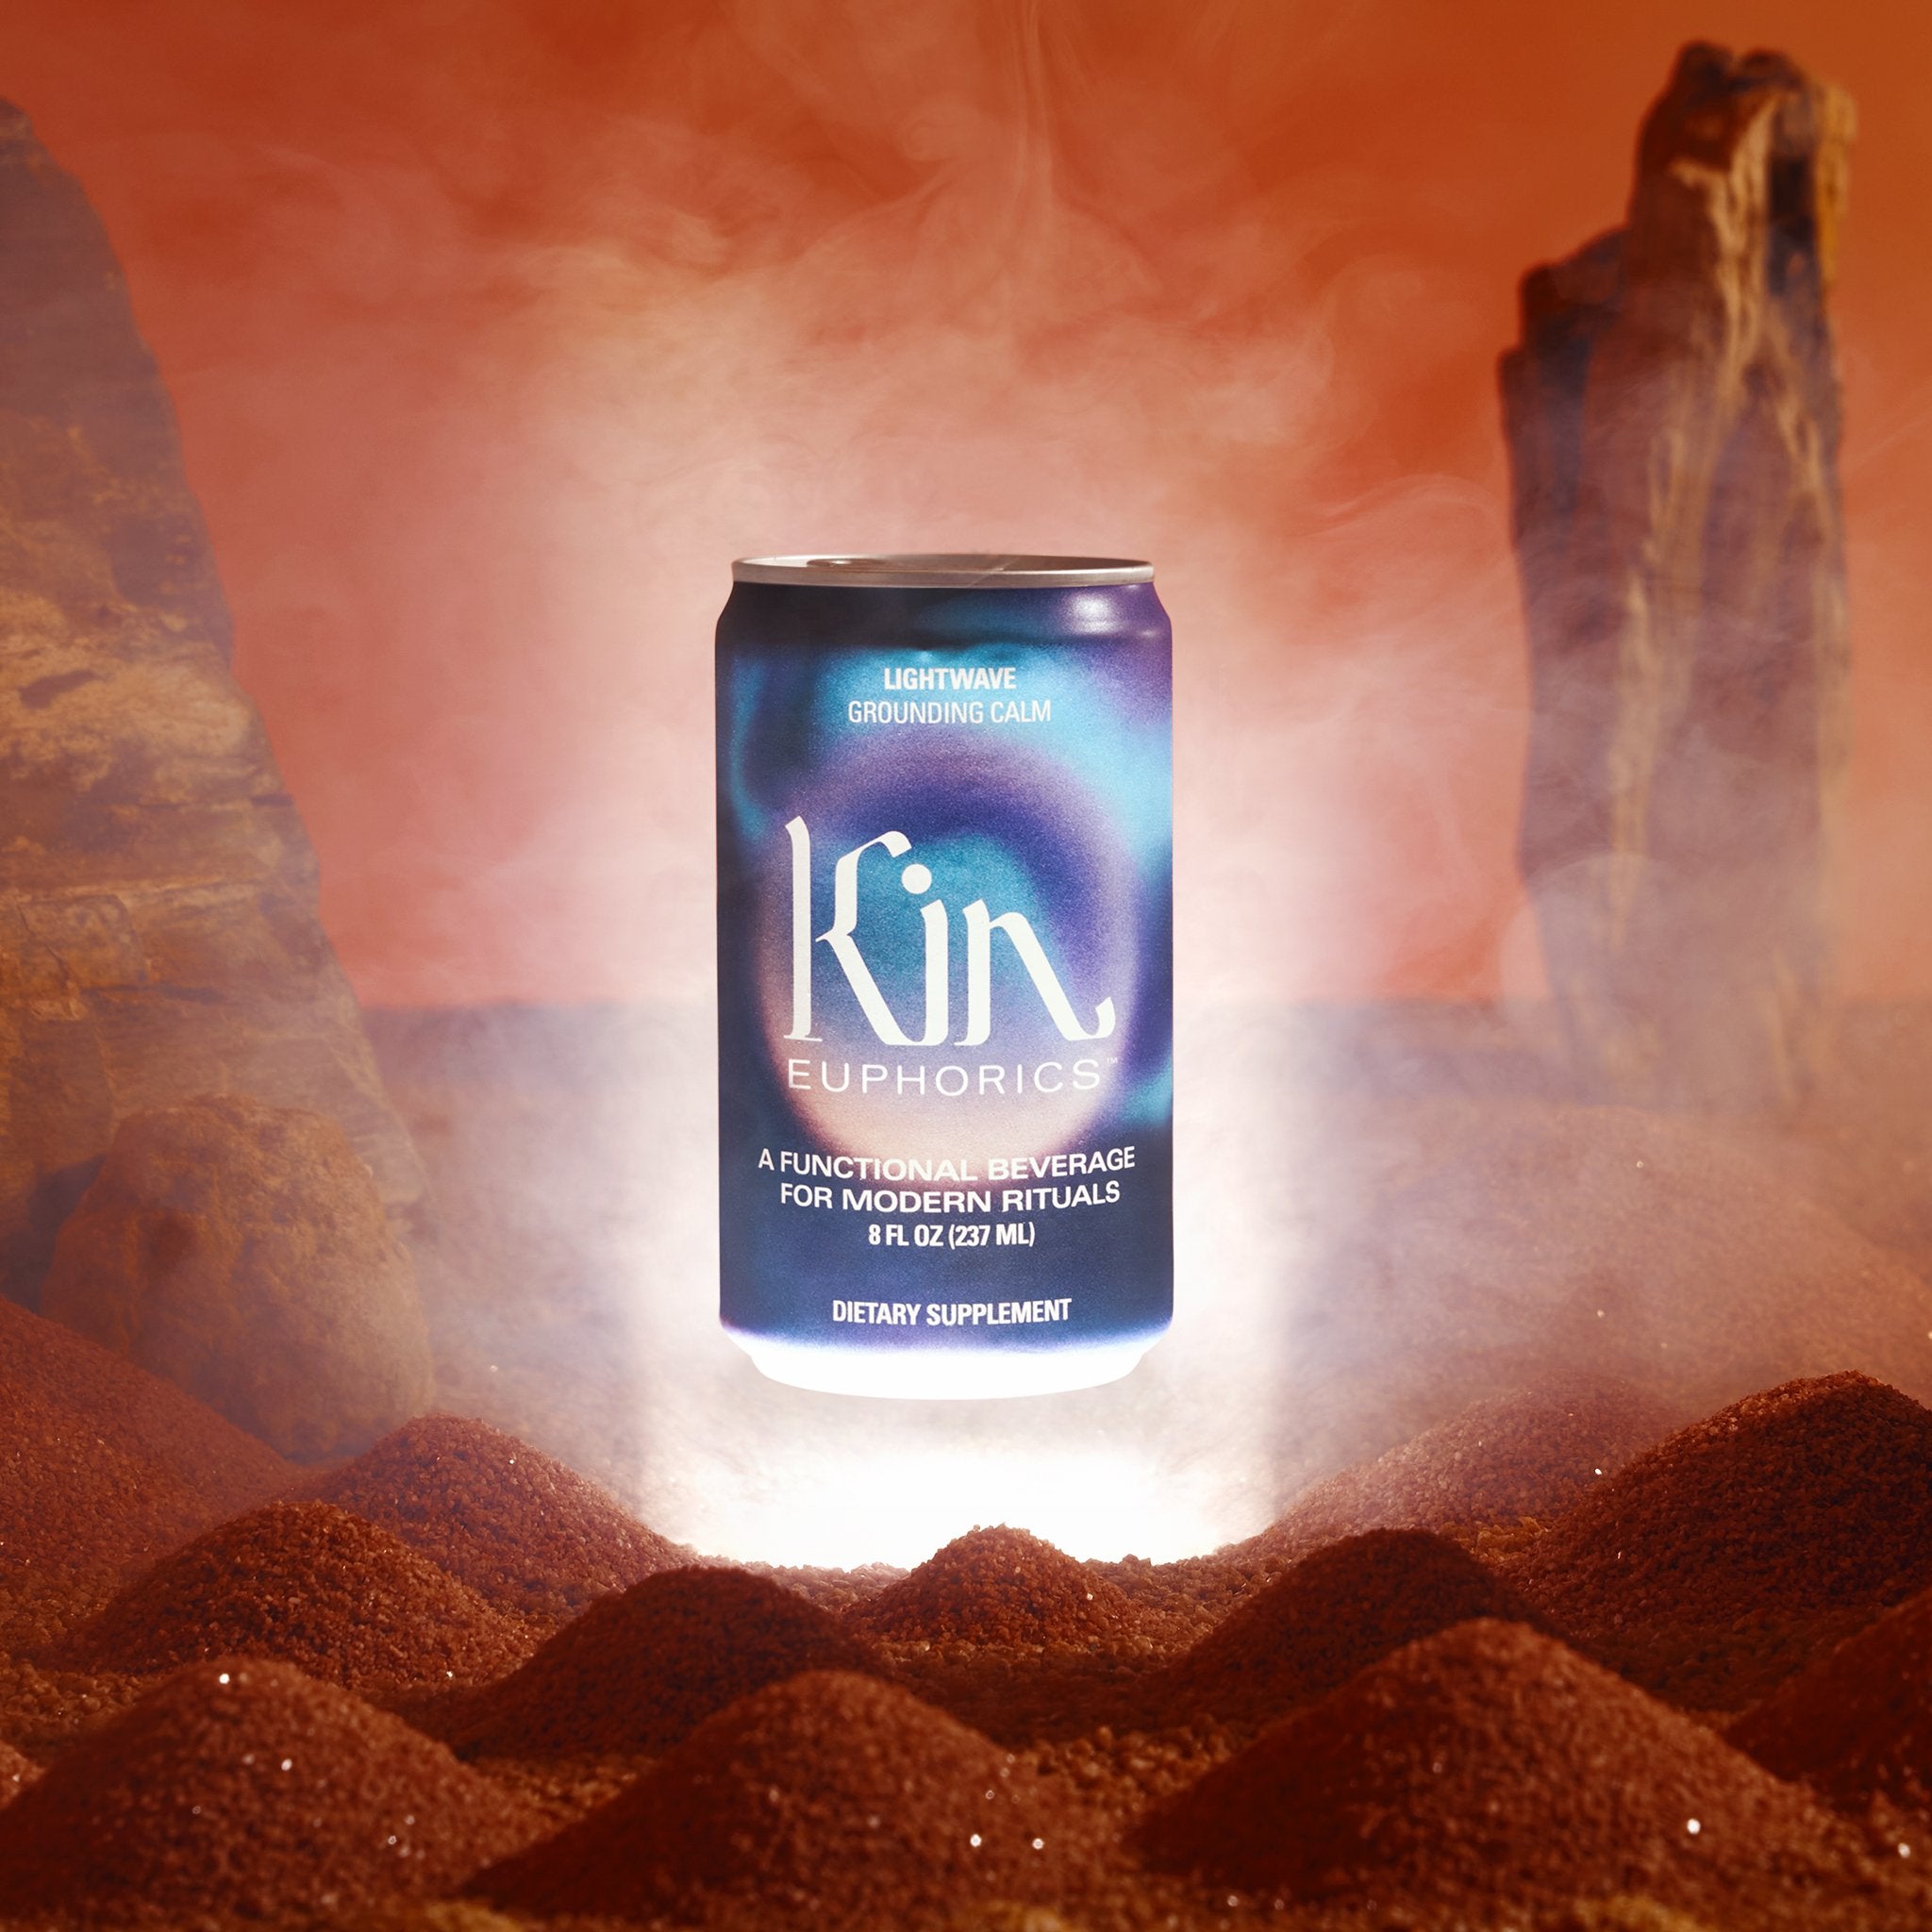 Can of kin euphorics calming non-alcoholic functional beverage, lightwave, made to wind down. Can is floating above a sandy desert backdrop